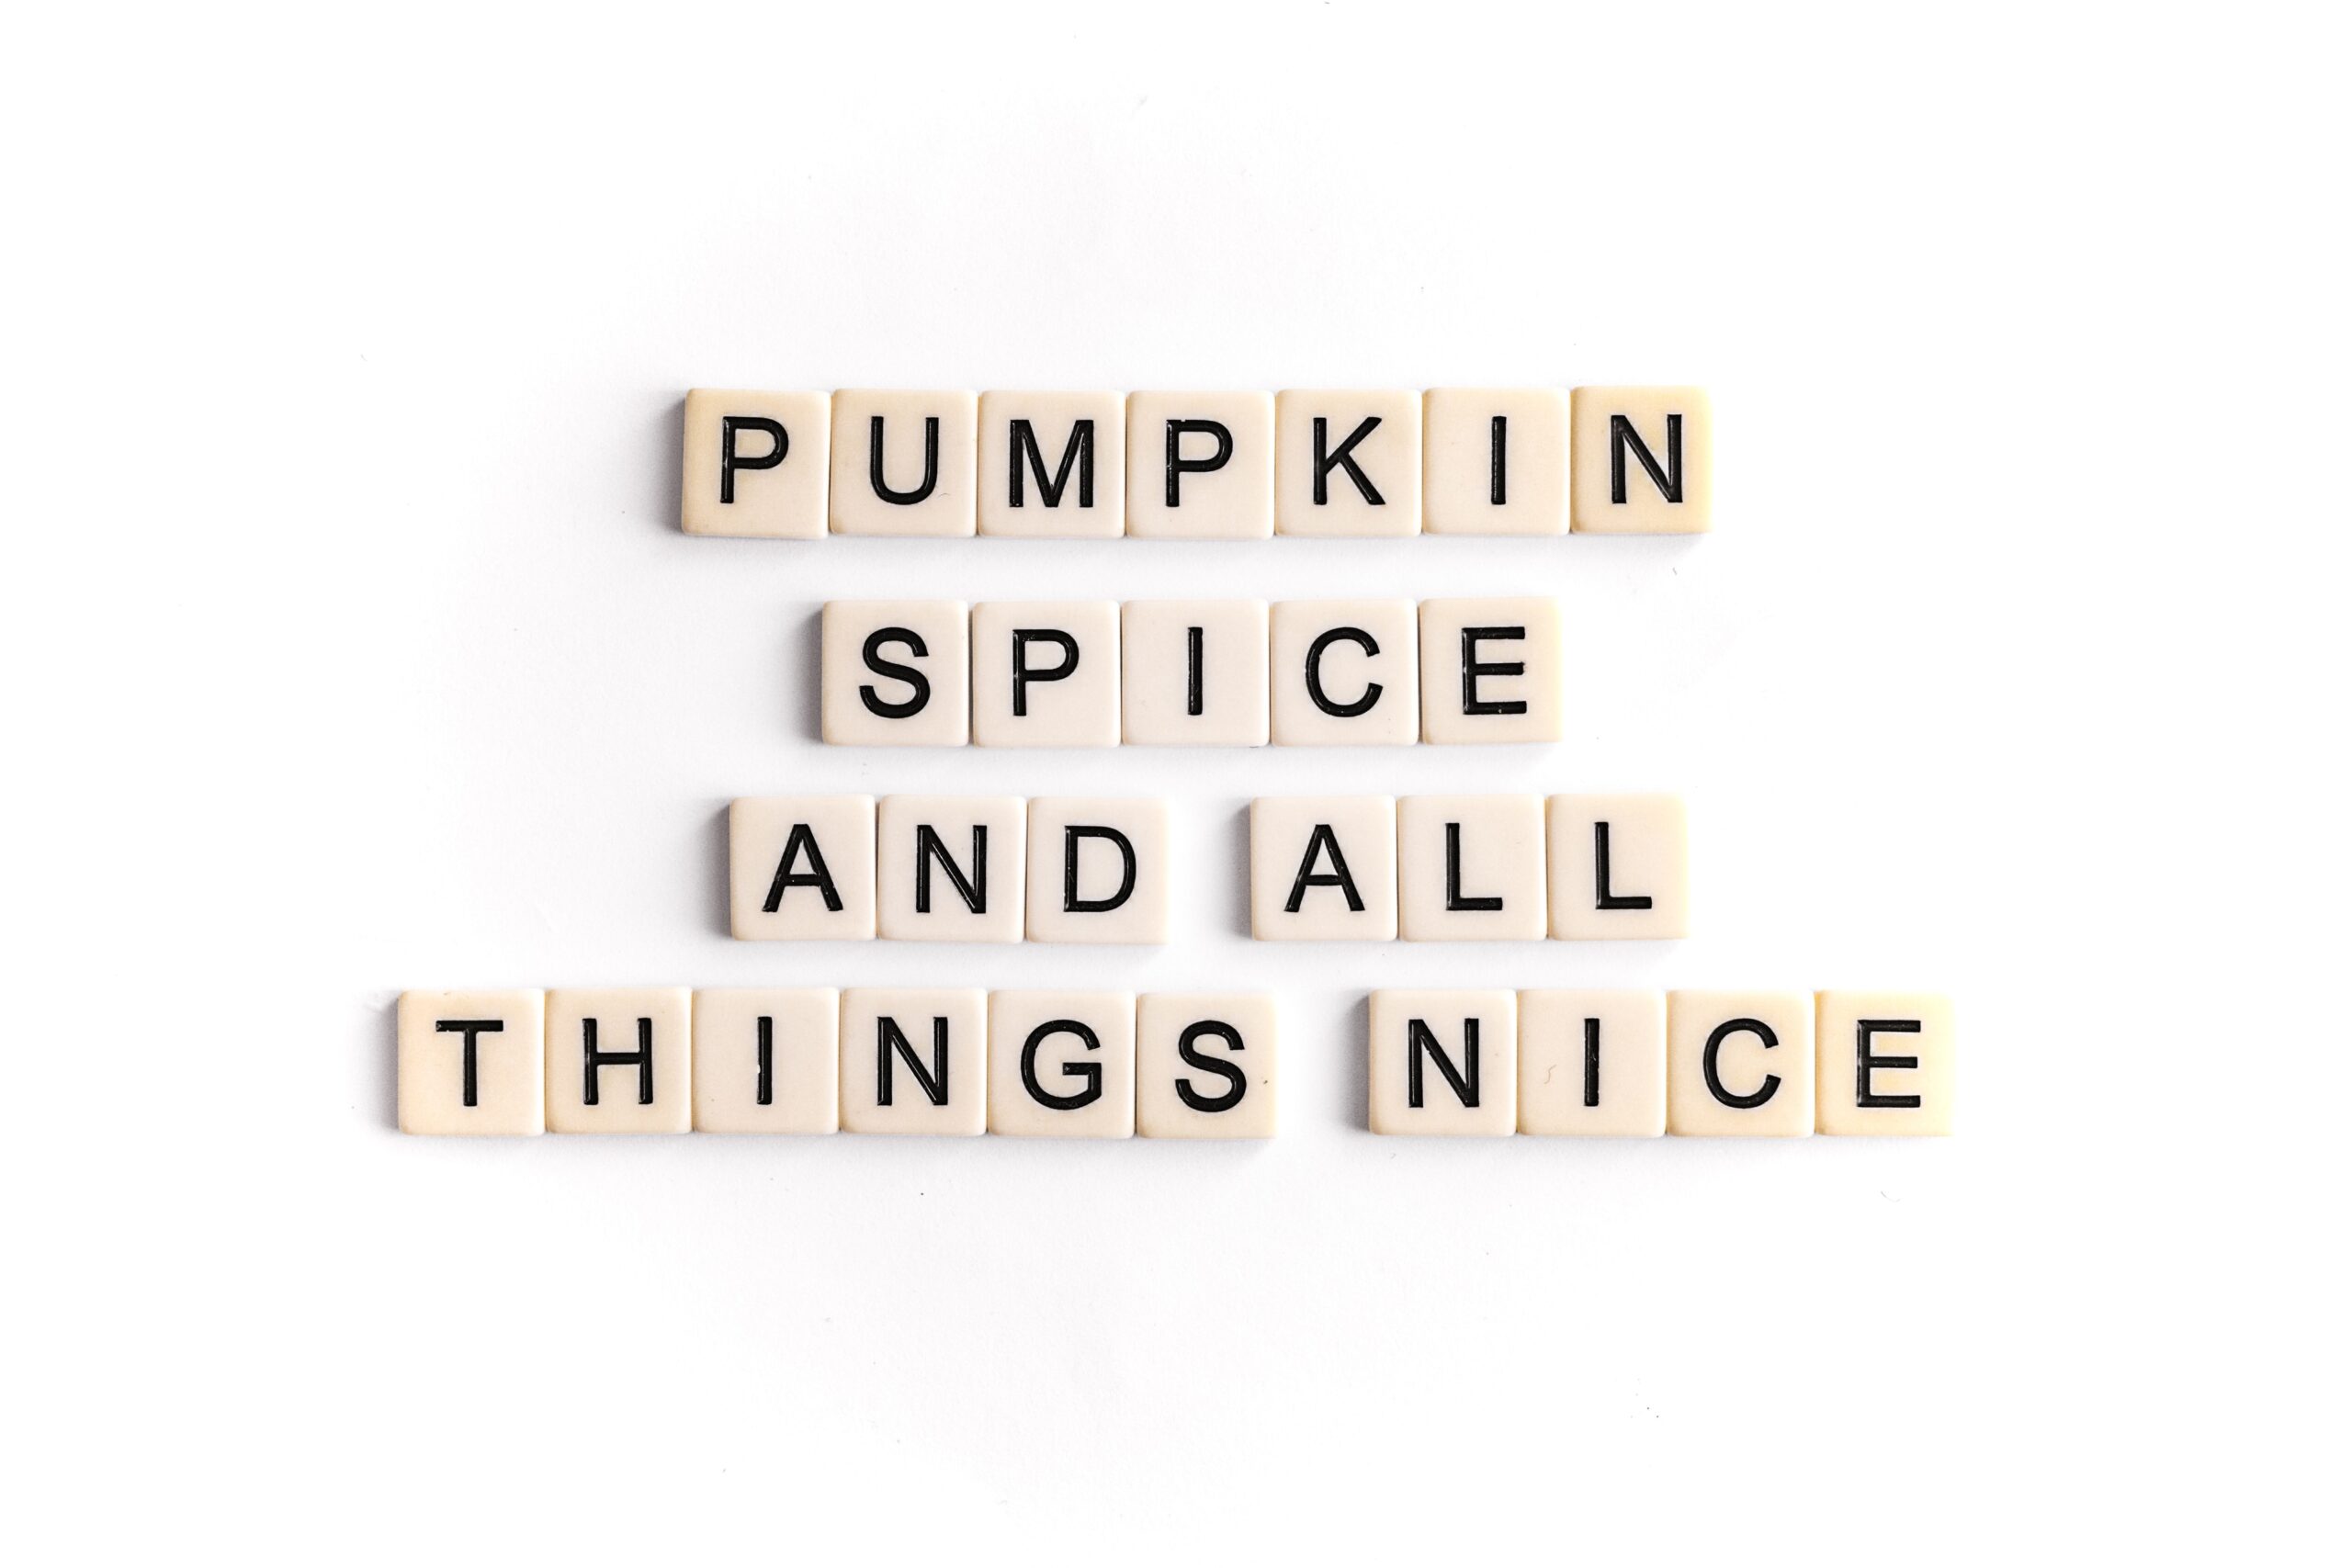 Pumpkin spice and all things nice